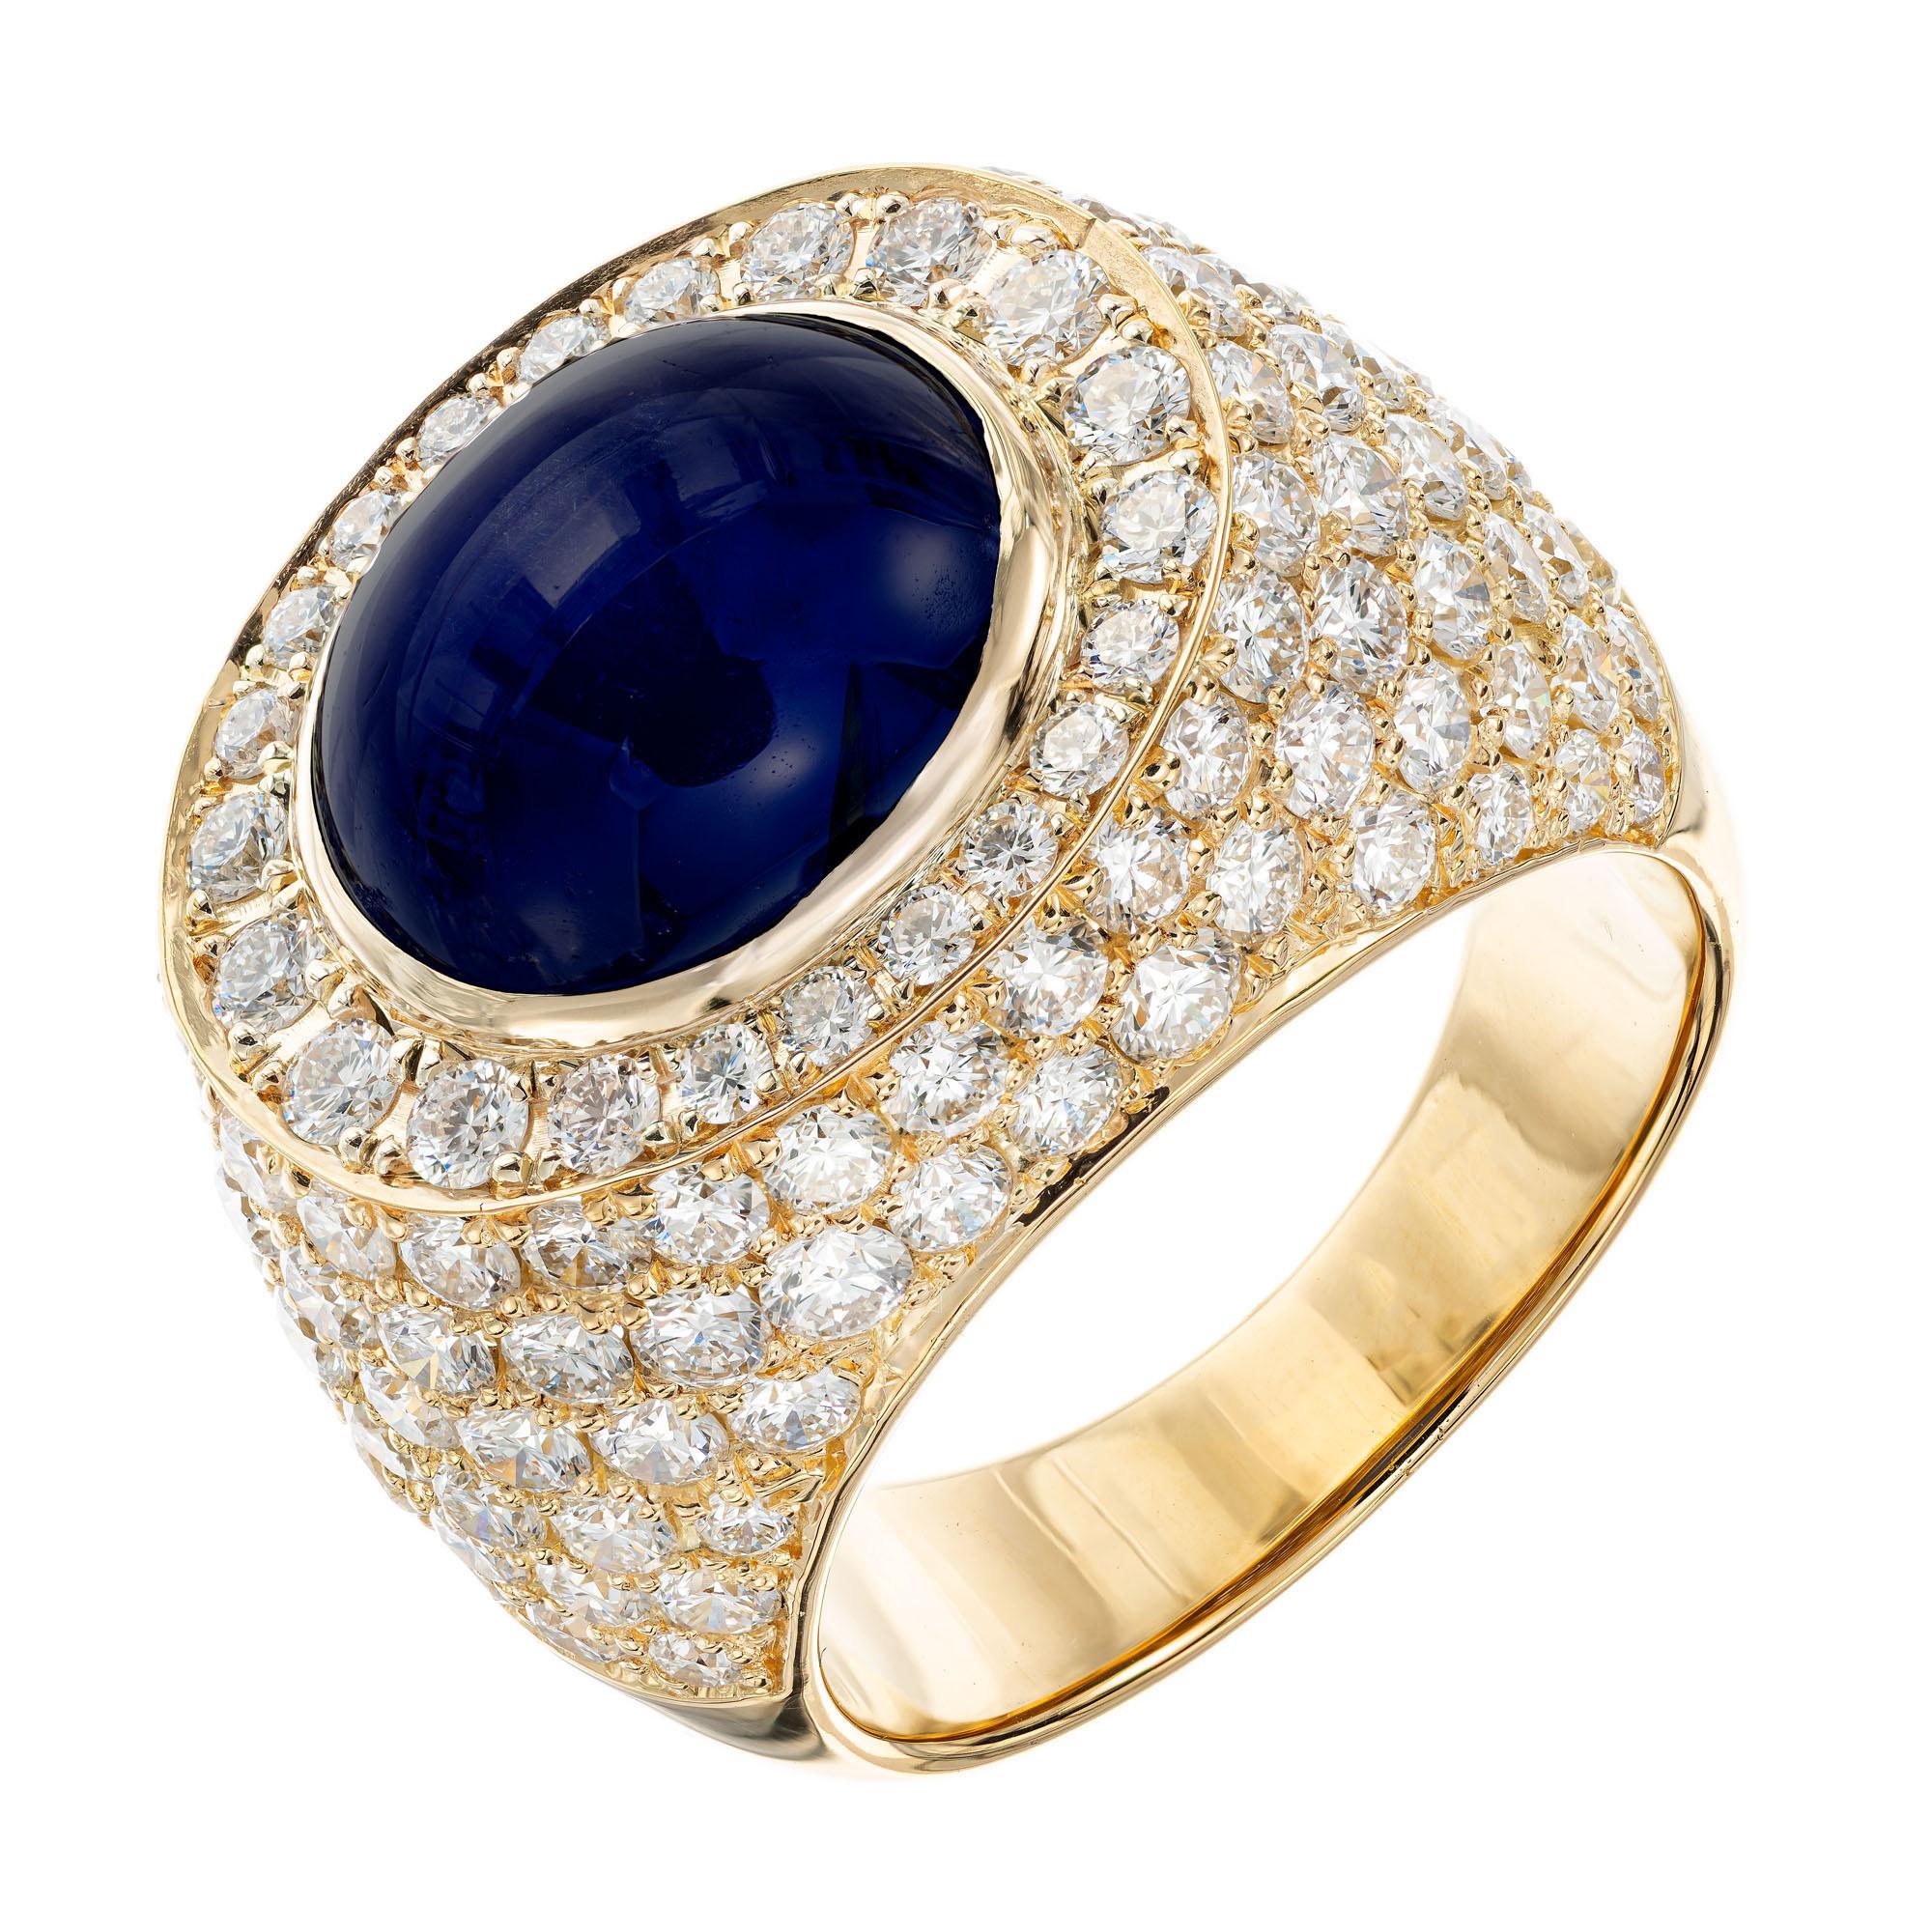 David Webb Mid-Century sapphire and diamond cocktail ring. GIA certified 14.4 carat oval cabochon Sri Lanka Sapphire center stone with 134 round brilliant cut accent diamonds. 18k yellow gold cocktail setting. This beautiful rich blue sapphire is